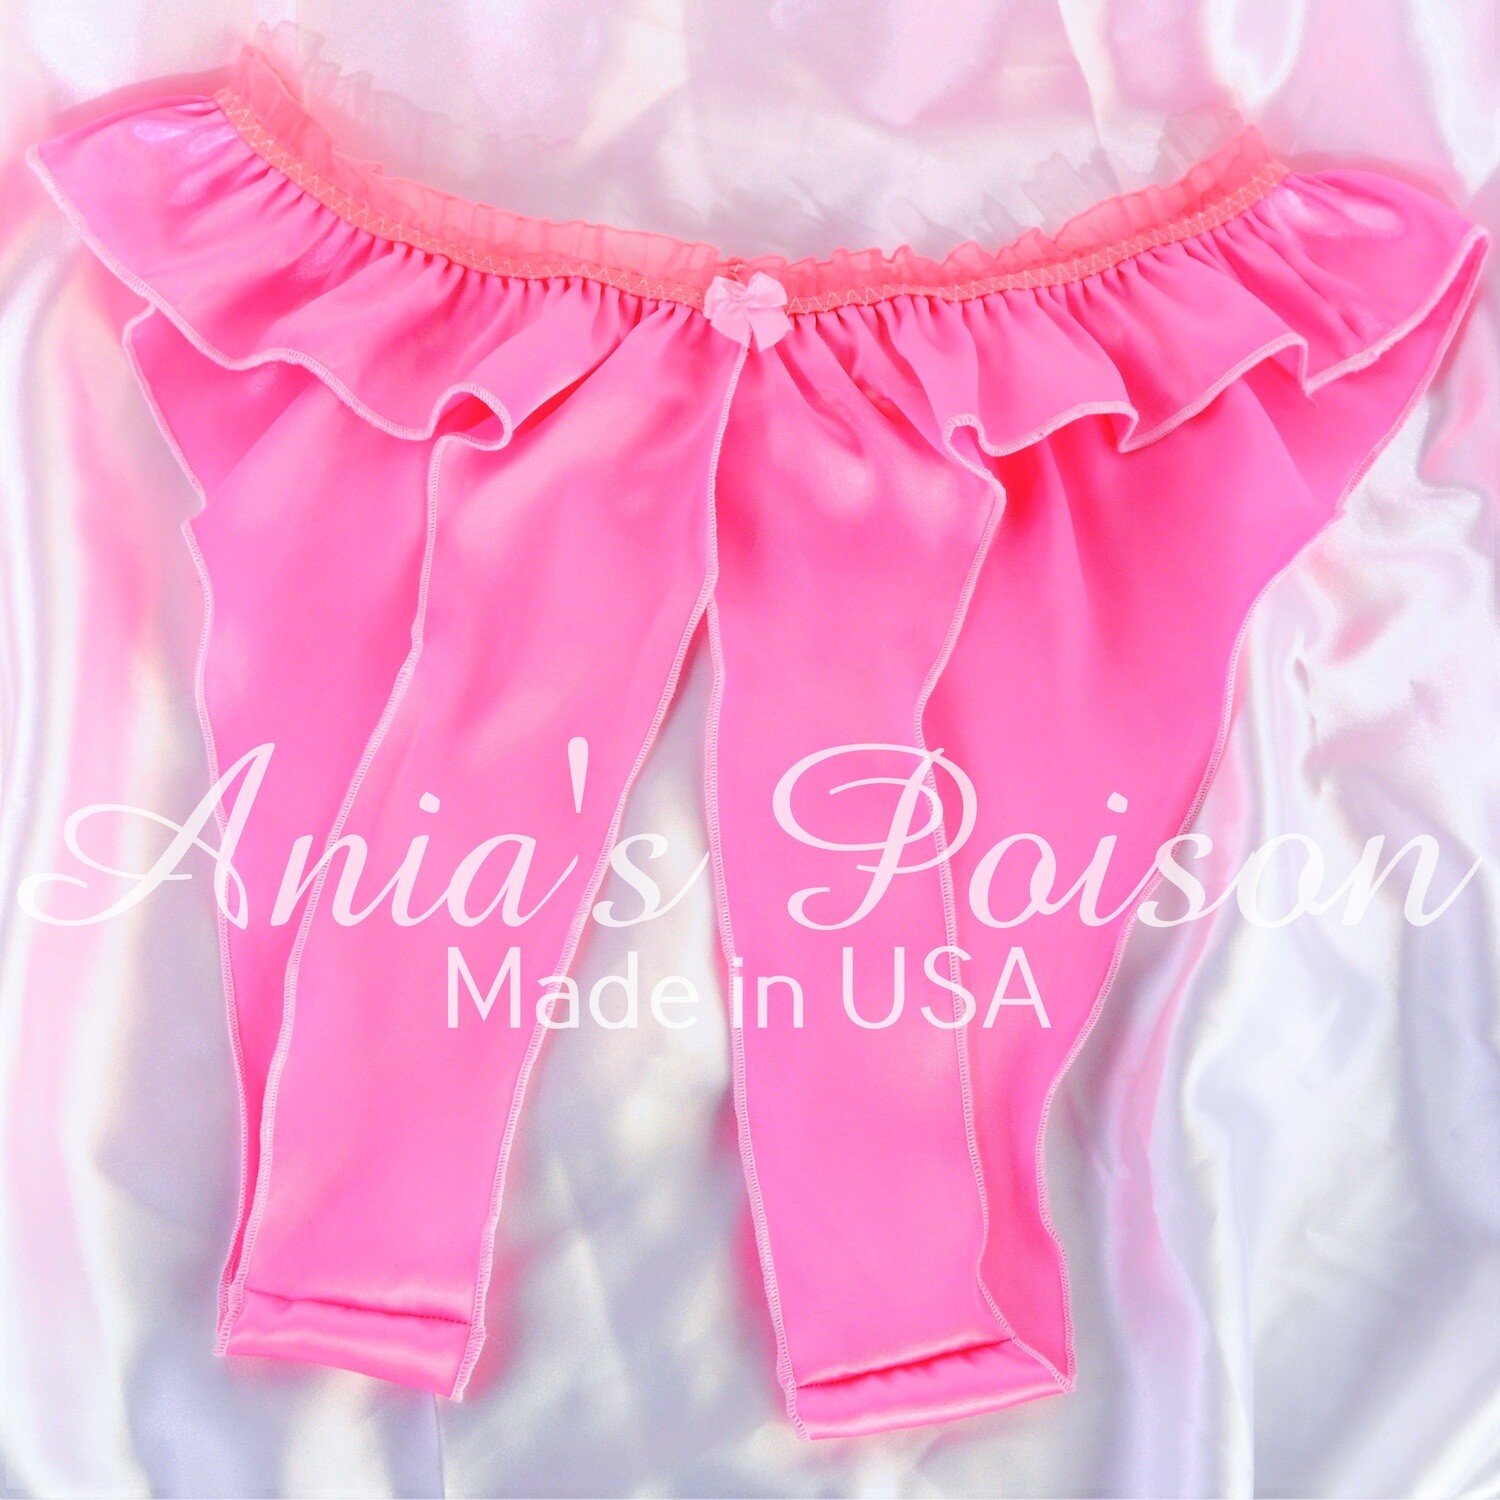 VTG style all satin bridal shiny high gloss crotchless ladies Pink or White butterfly OS fetish panties M-XL